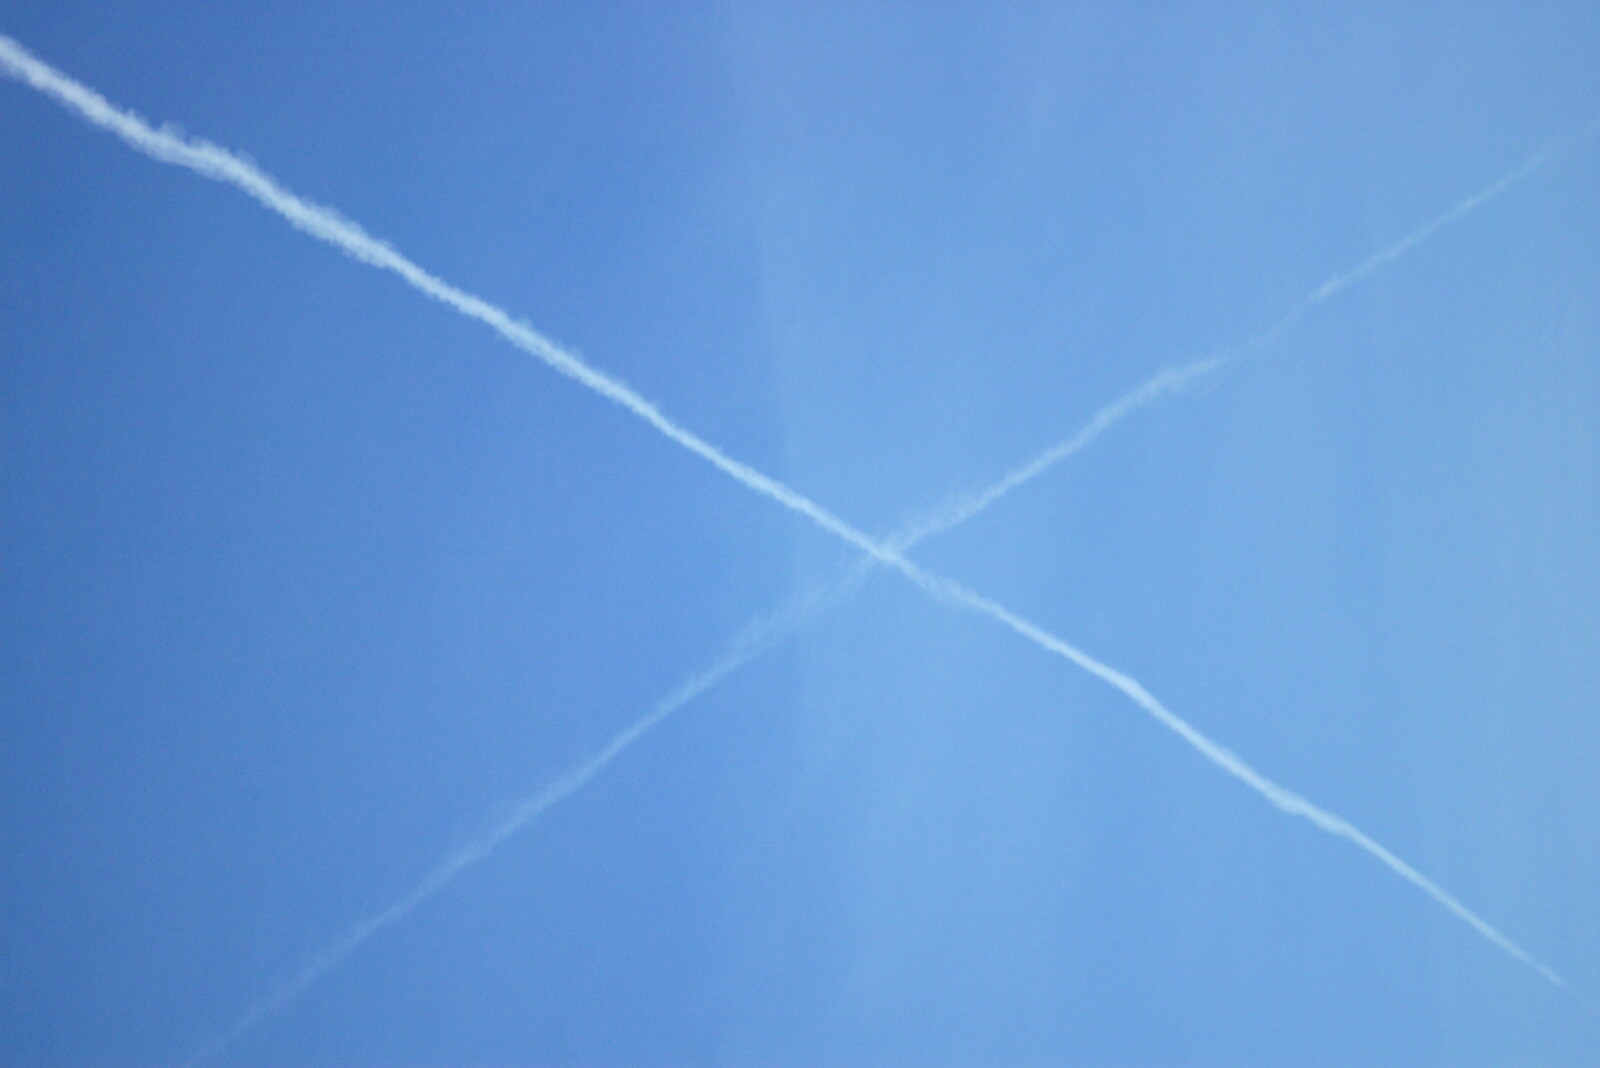 Two contrails cross like the flag of St. Andrew from BSCC Bike Rides and Fun With Diffraction Gratings, Gissing and Diss - 26th May 2005